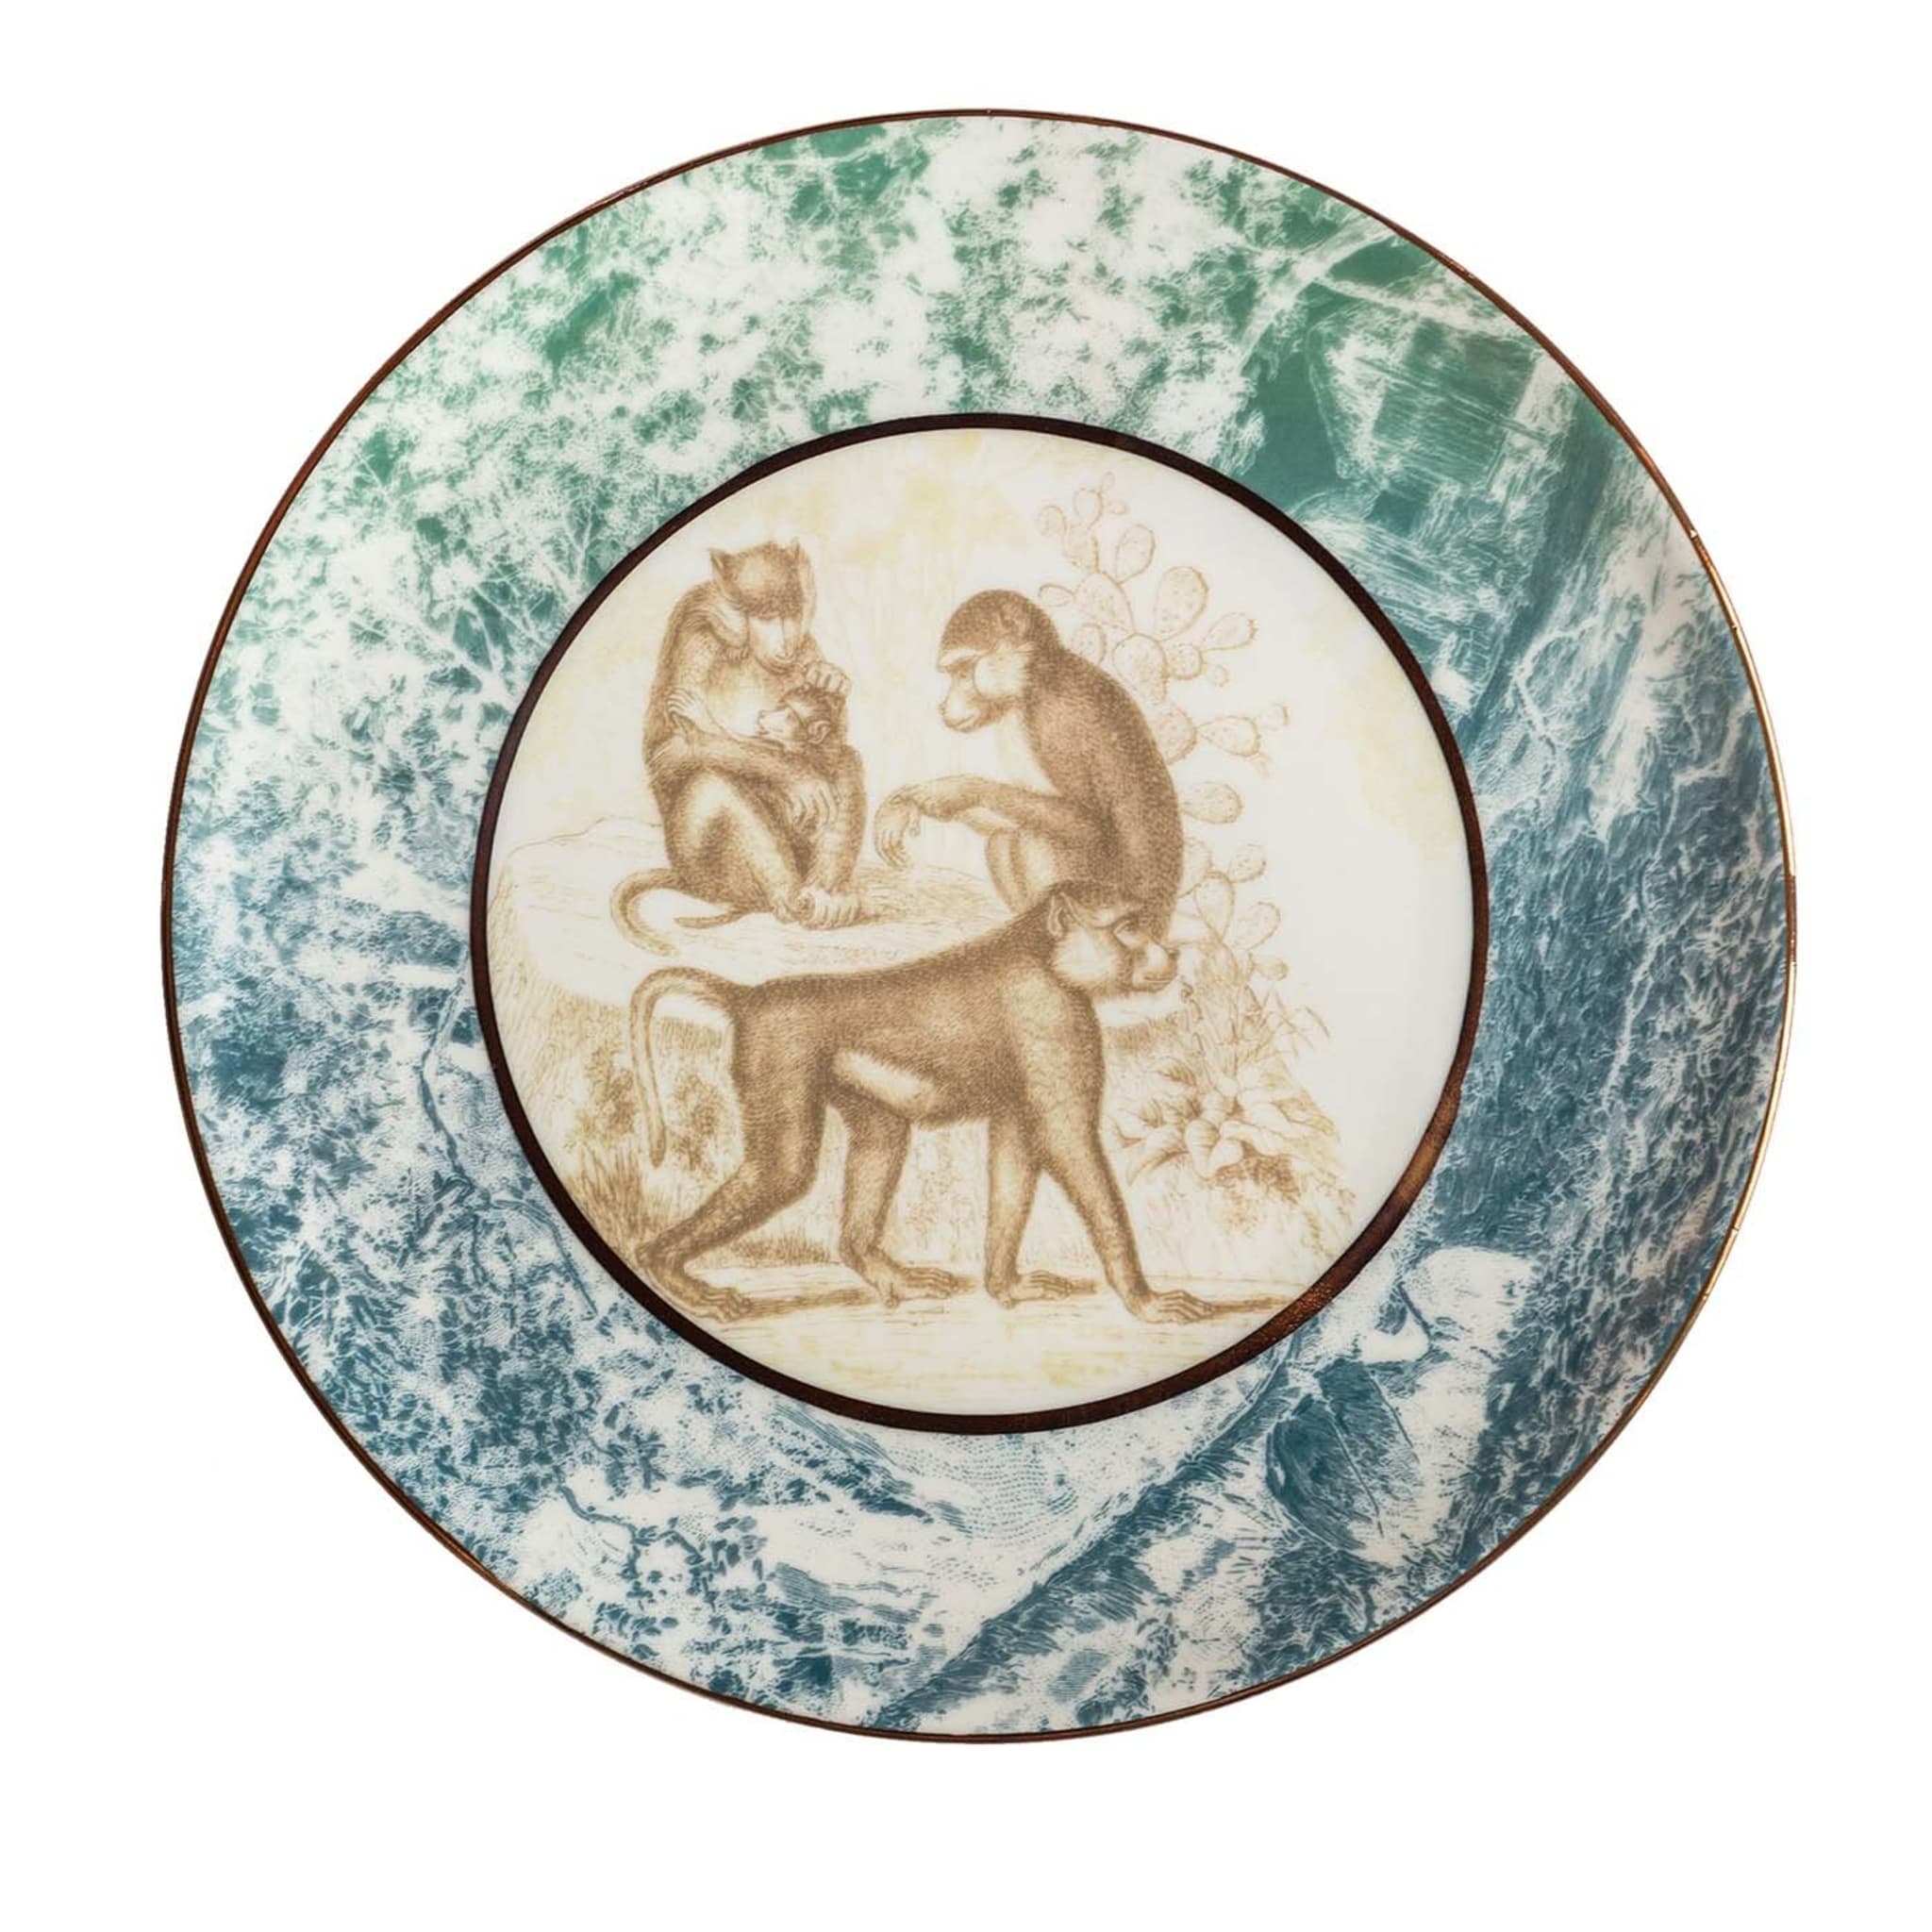 Galtaji Porcelain Dinner Plate With Landscape And Monkeys #4 - Main view